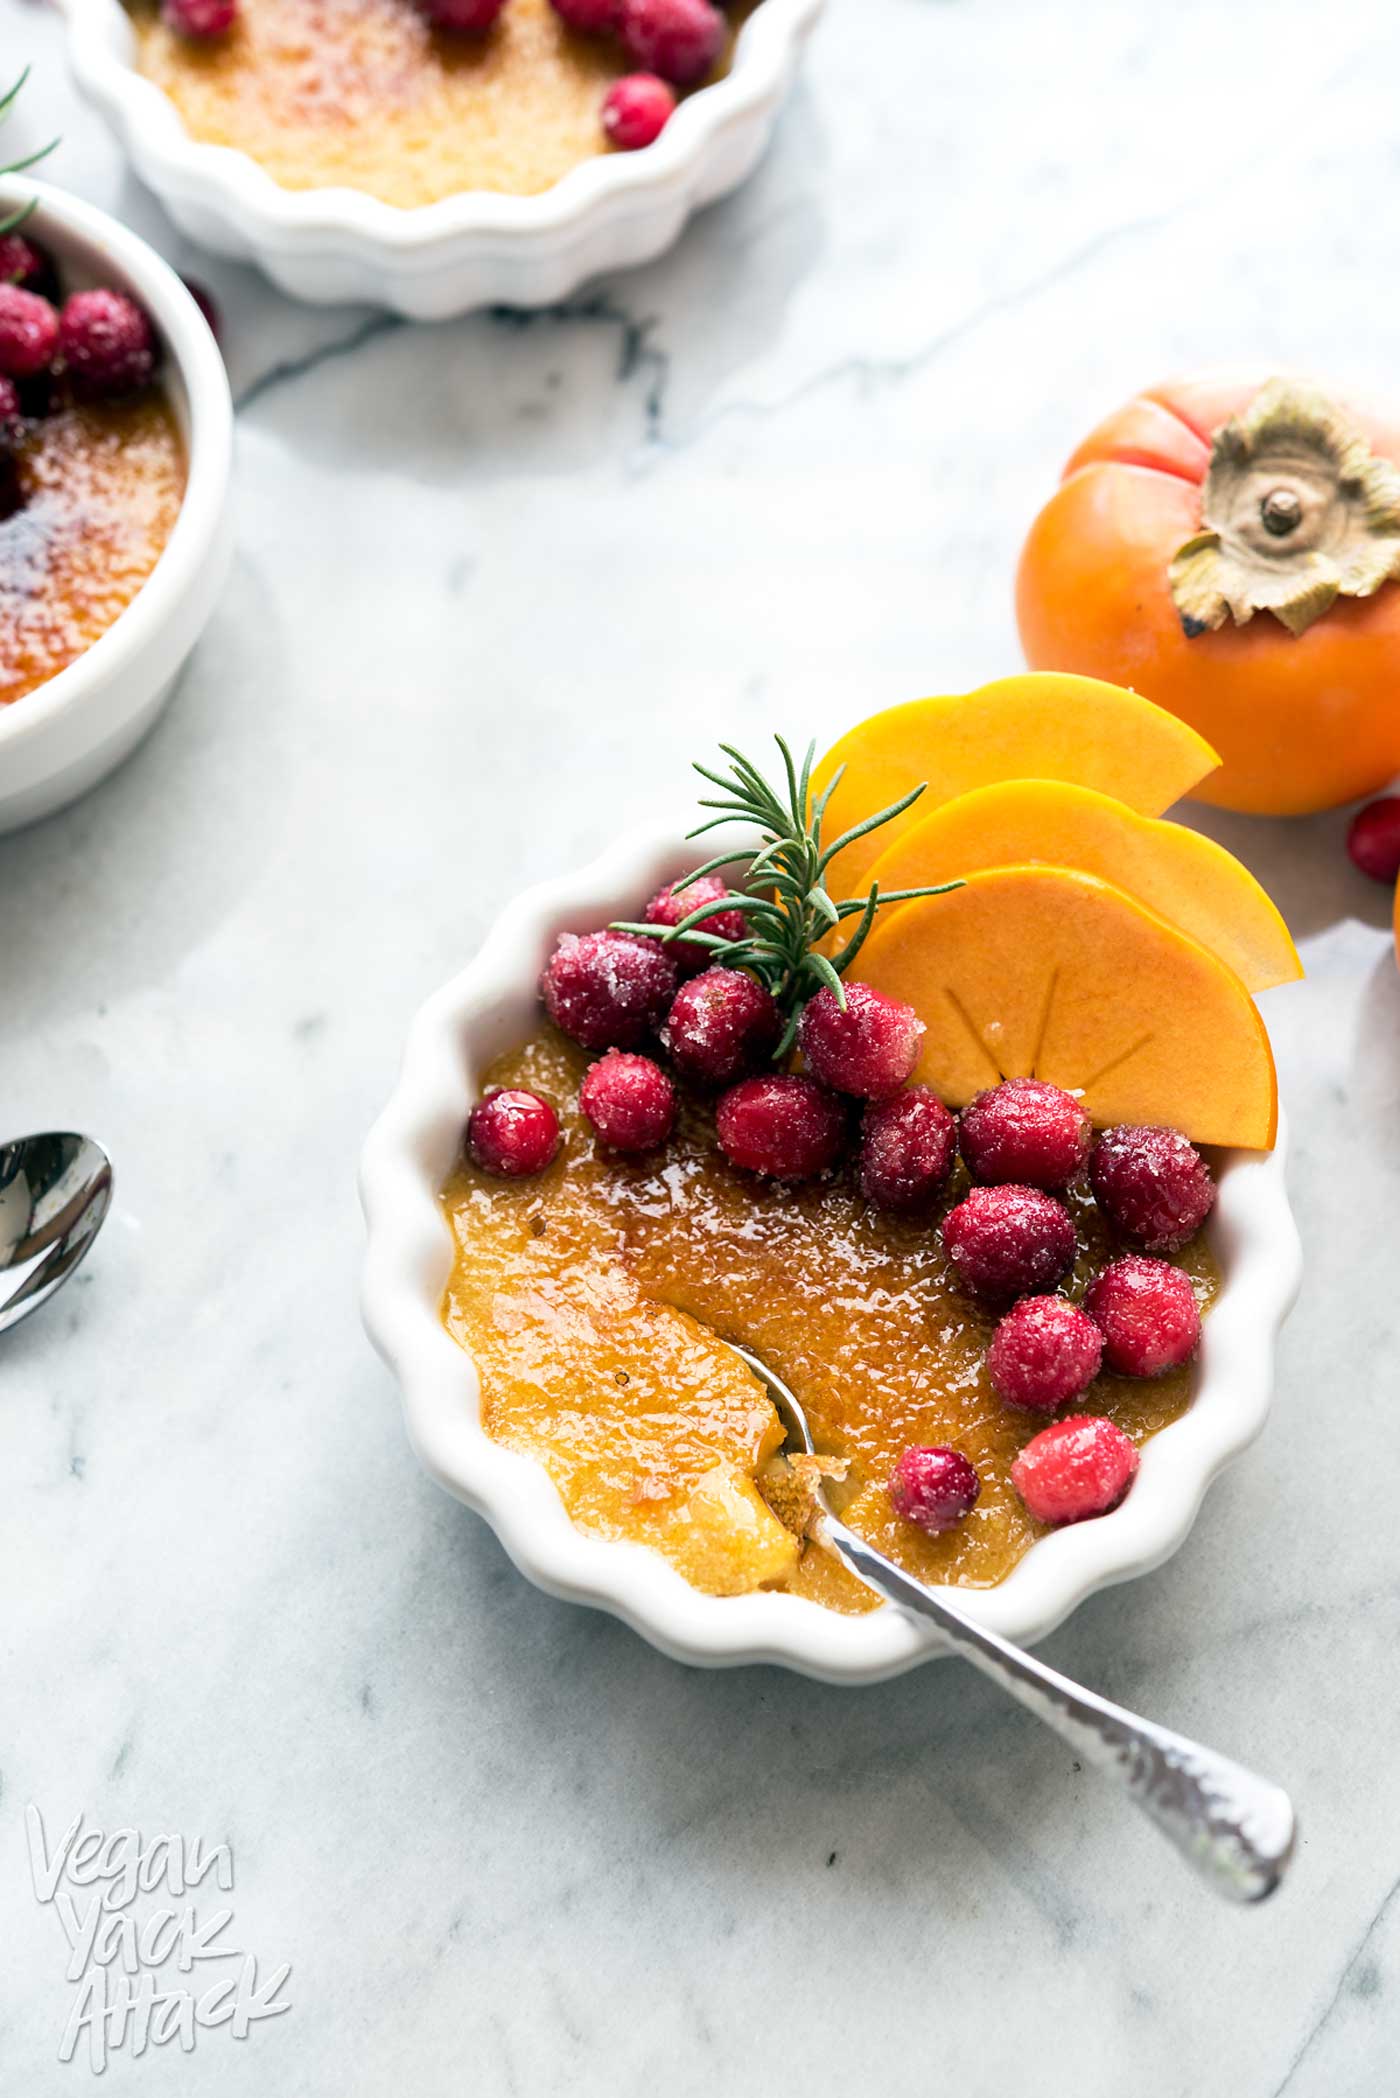 Looking for a stunning holiday dessert that is easy-to-make? Check out this impressive, vegan Persimmon Crème Brûlée with Sugared Cranberries! Made with Silk’s Vanilla Almond Creamer. #SilkCreamer #glutenfree #soyfree